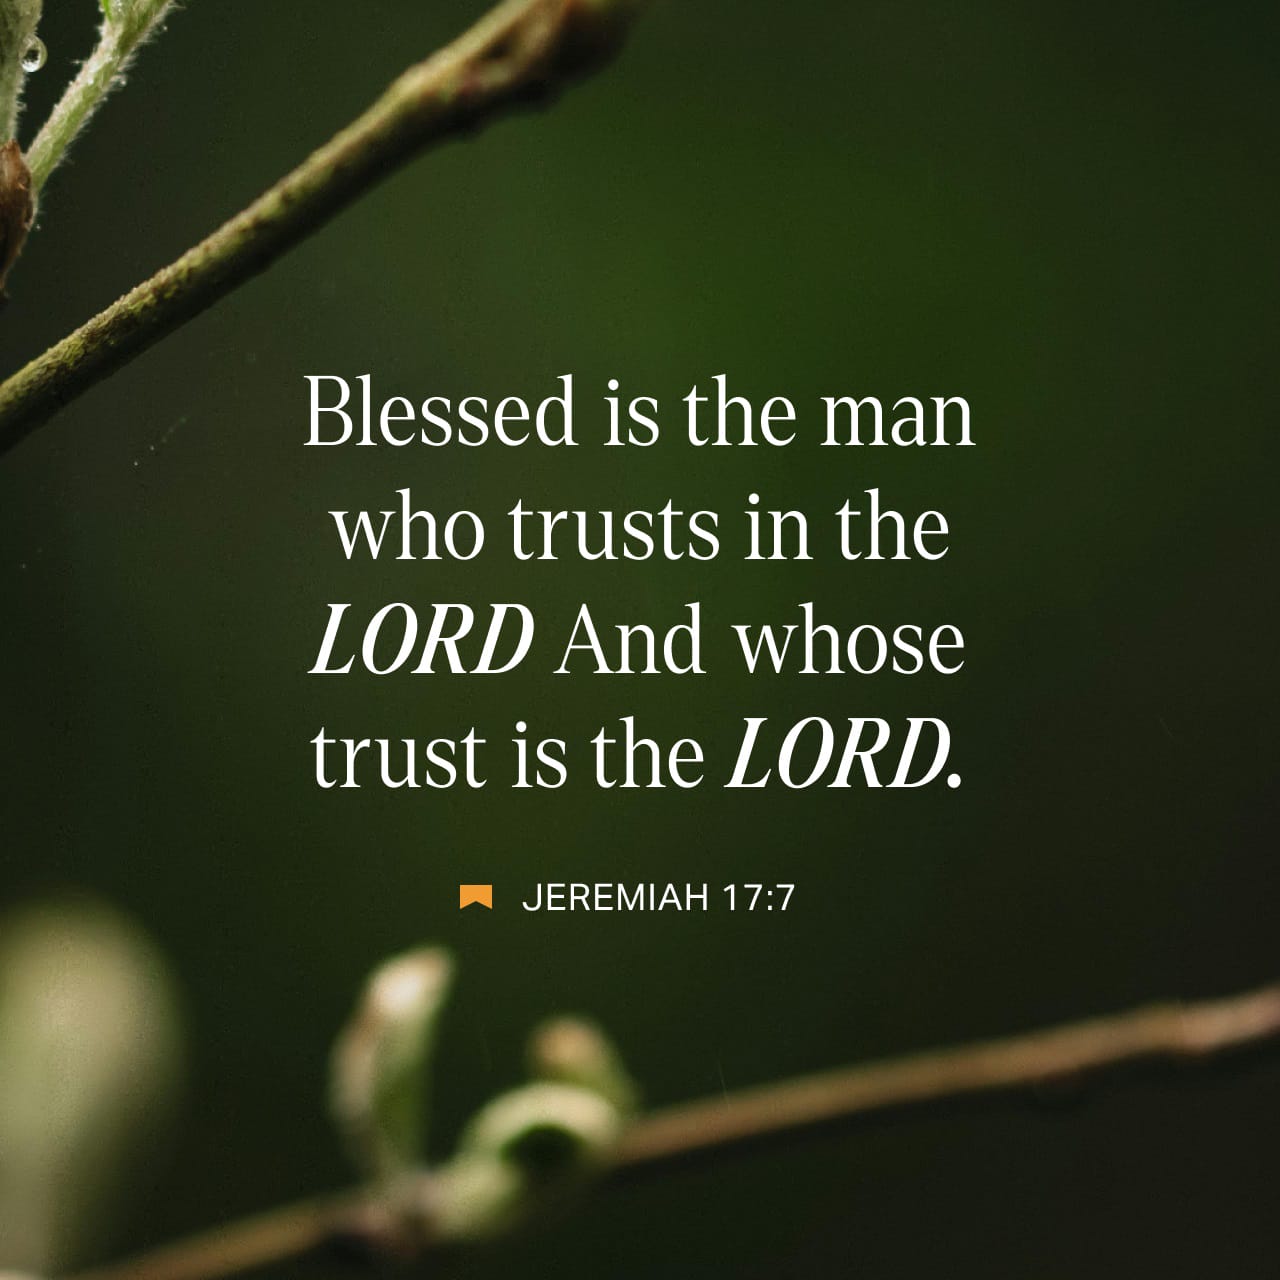 Jeremiah 17:7 Blessed is the man that trusteth in the LORD, and whose hope the LORD is. | King James Version (KJV) | Download The Bible App Now